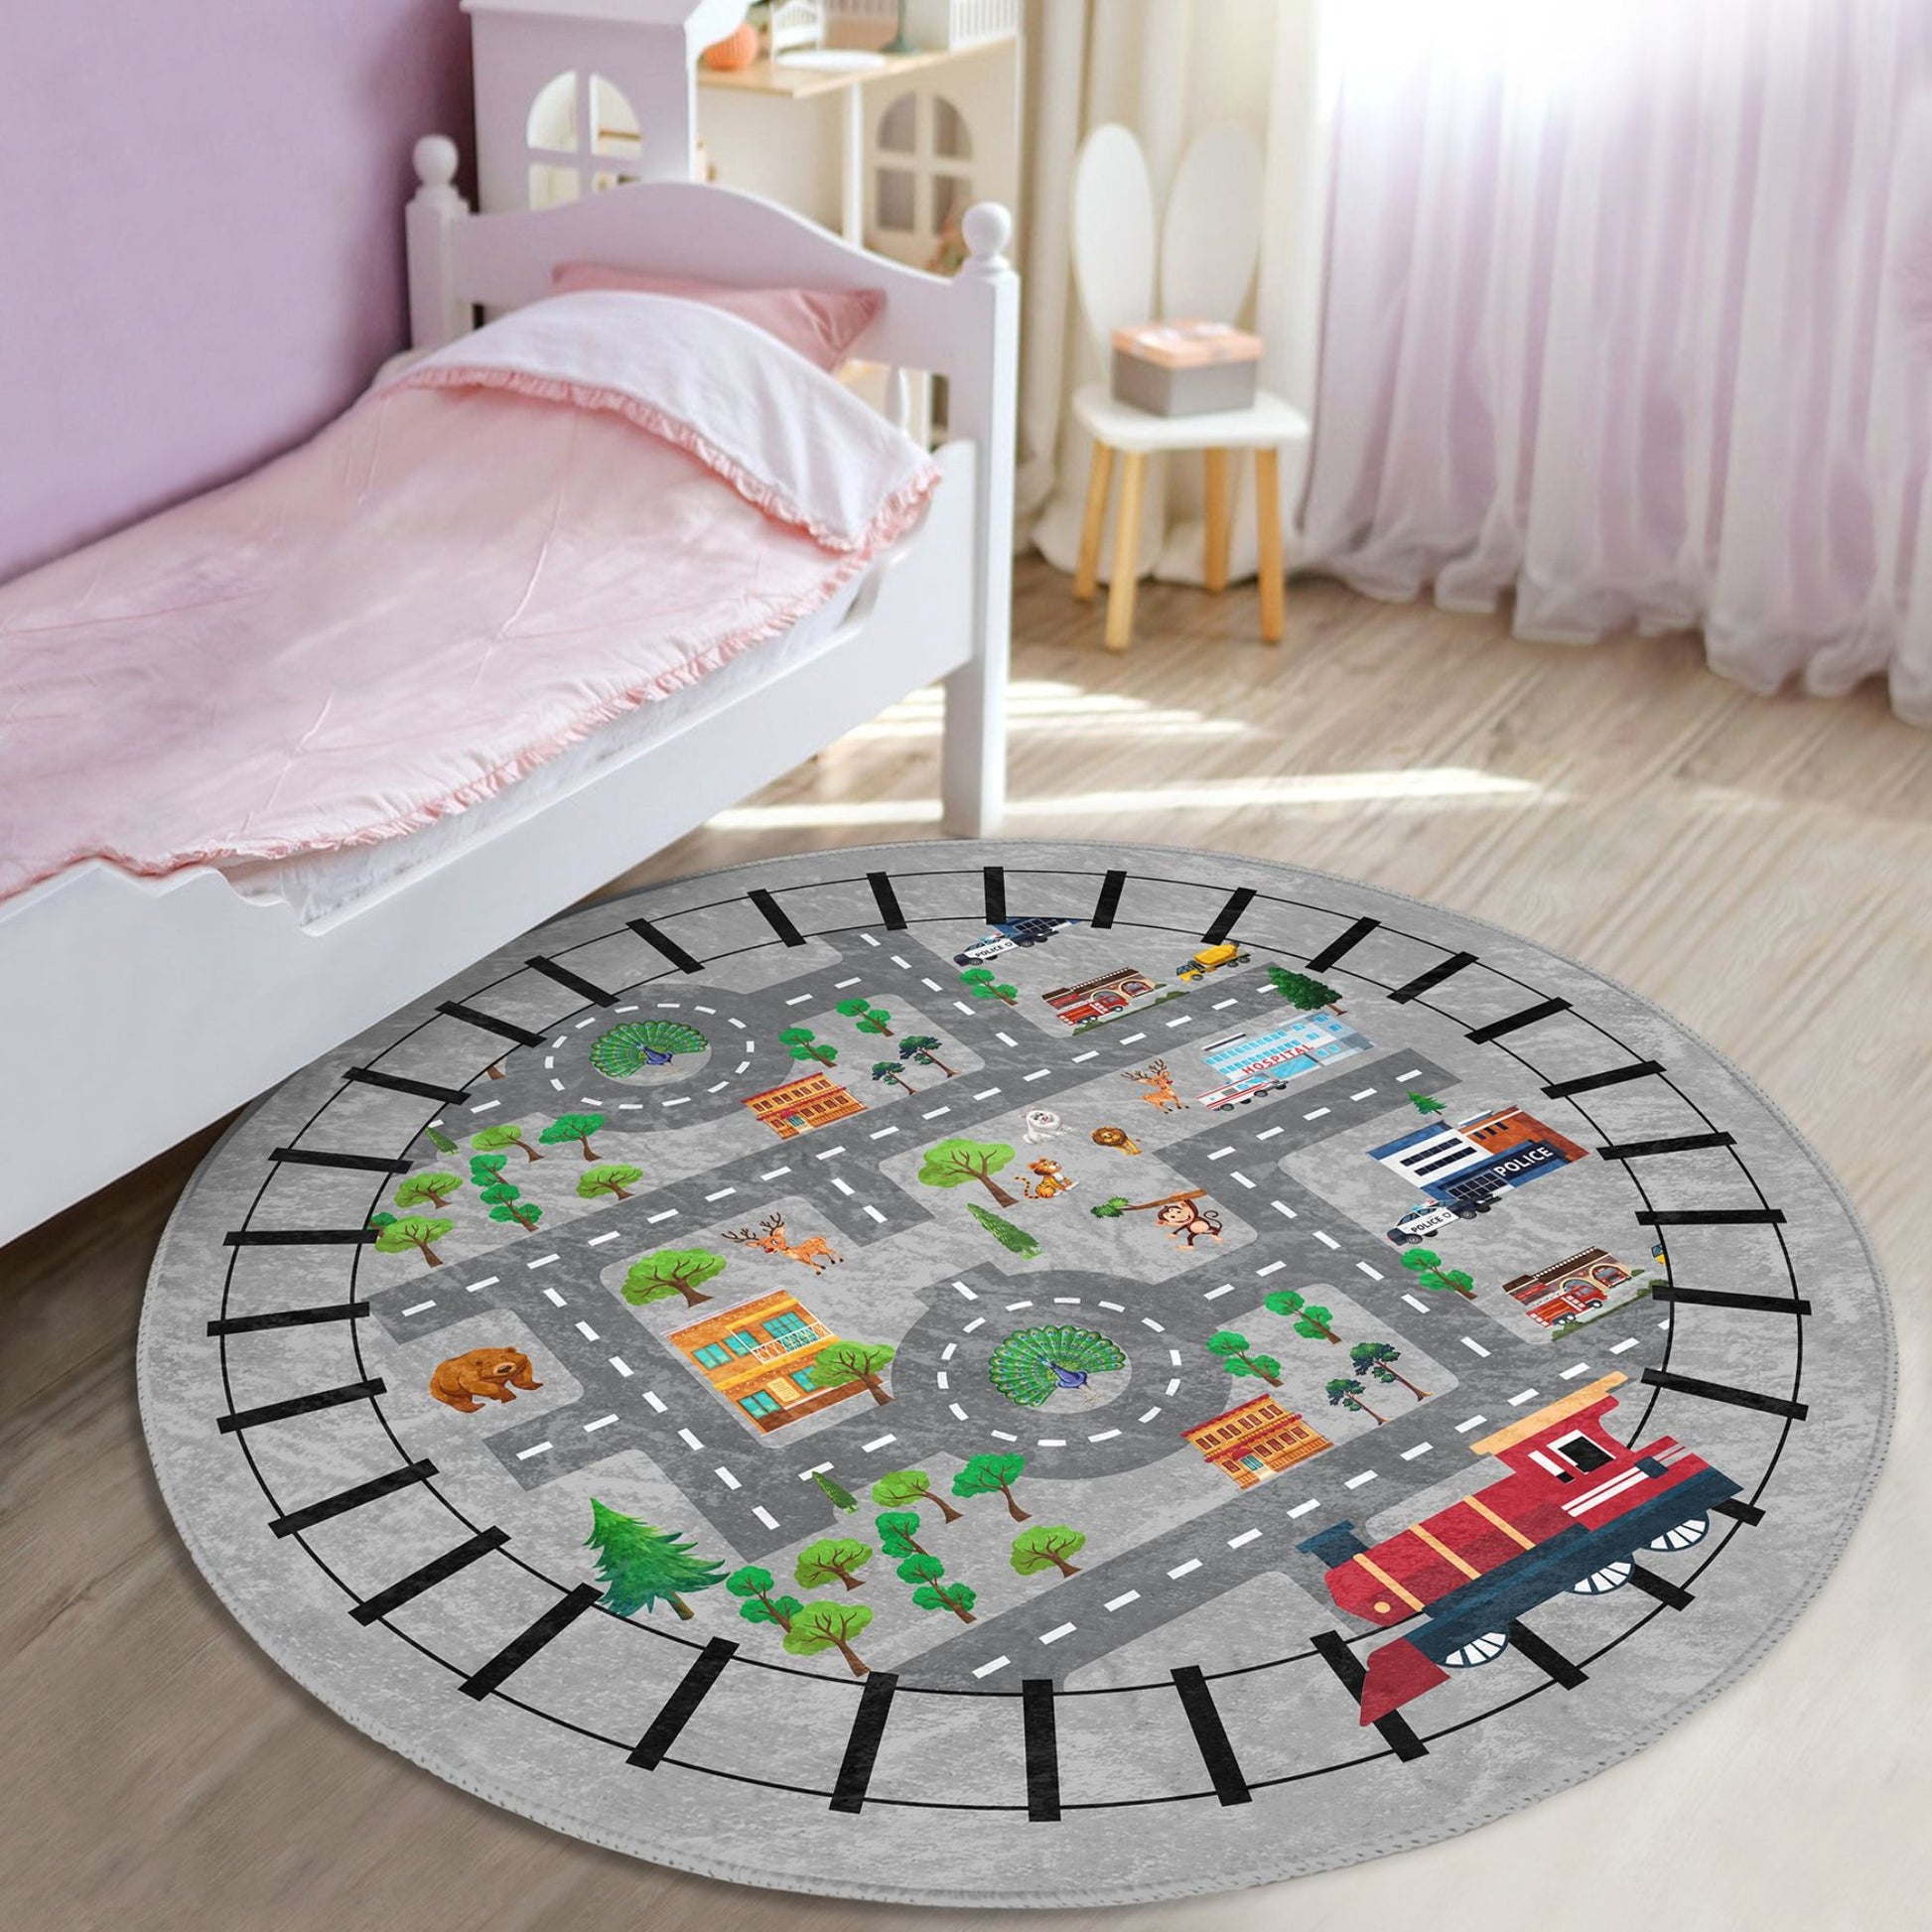 Rug with City Map and Train Design for Kids' Play Area